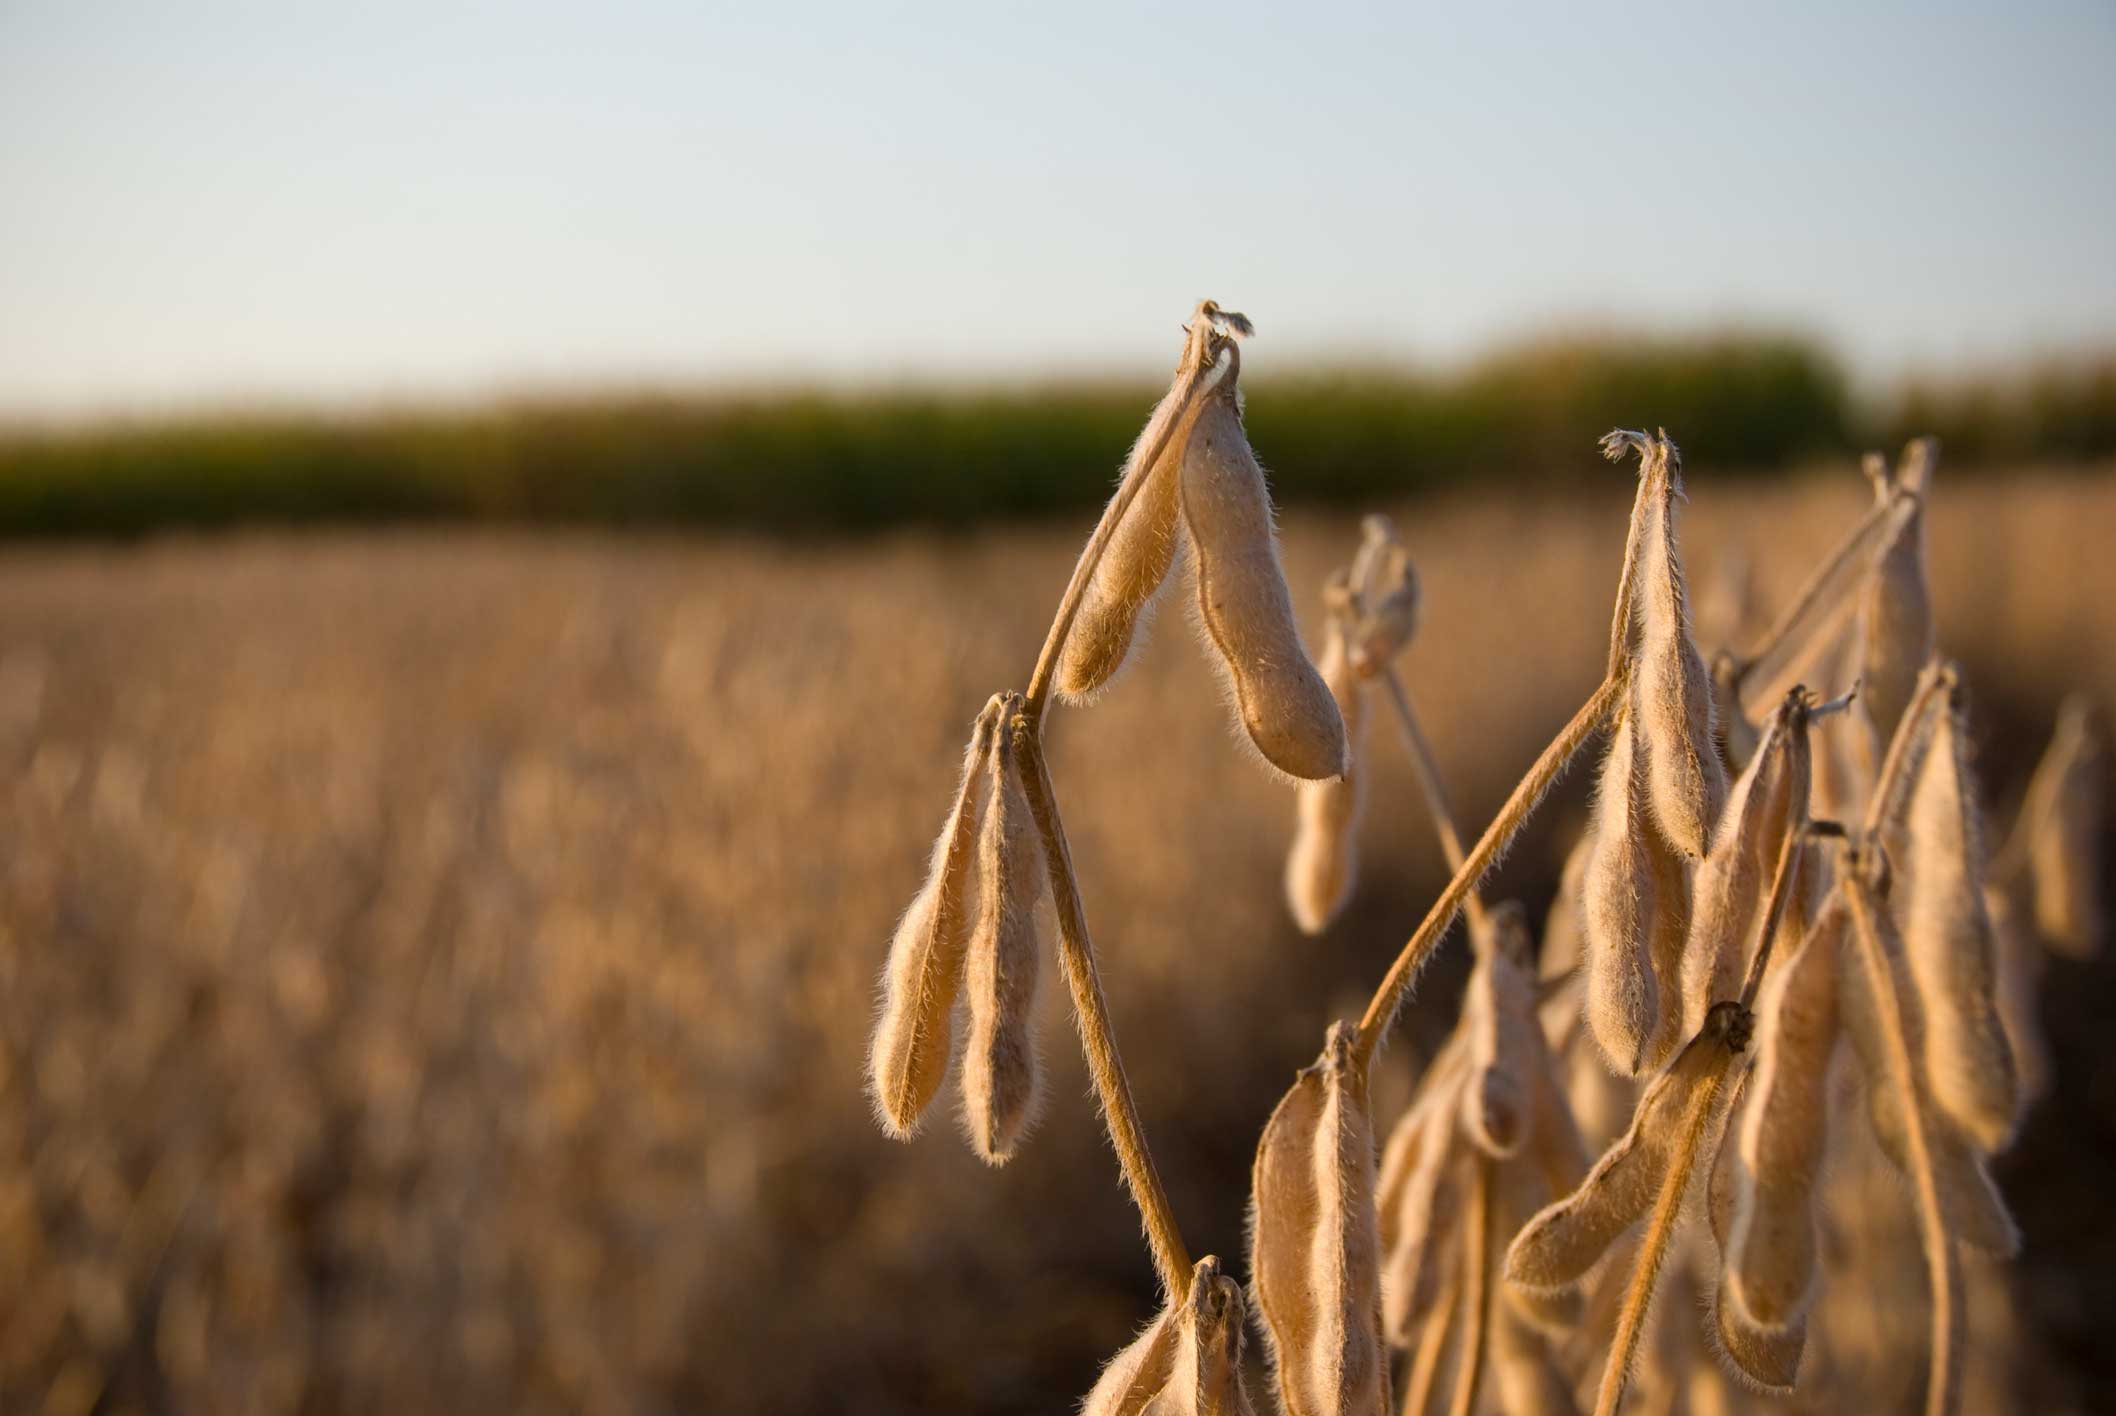 A close up of soybean stalks in a blurred out field.